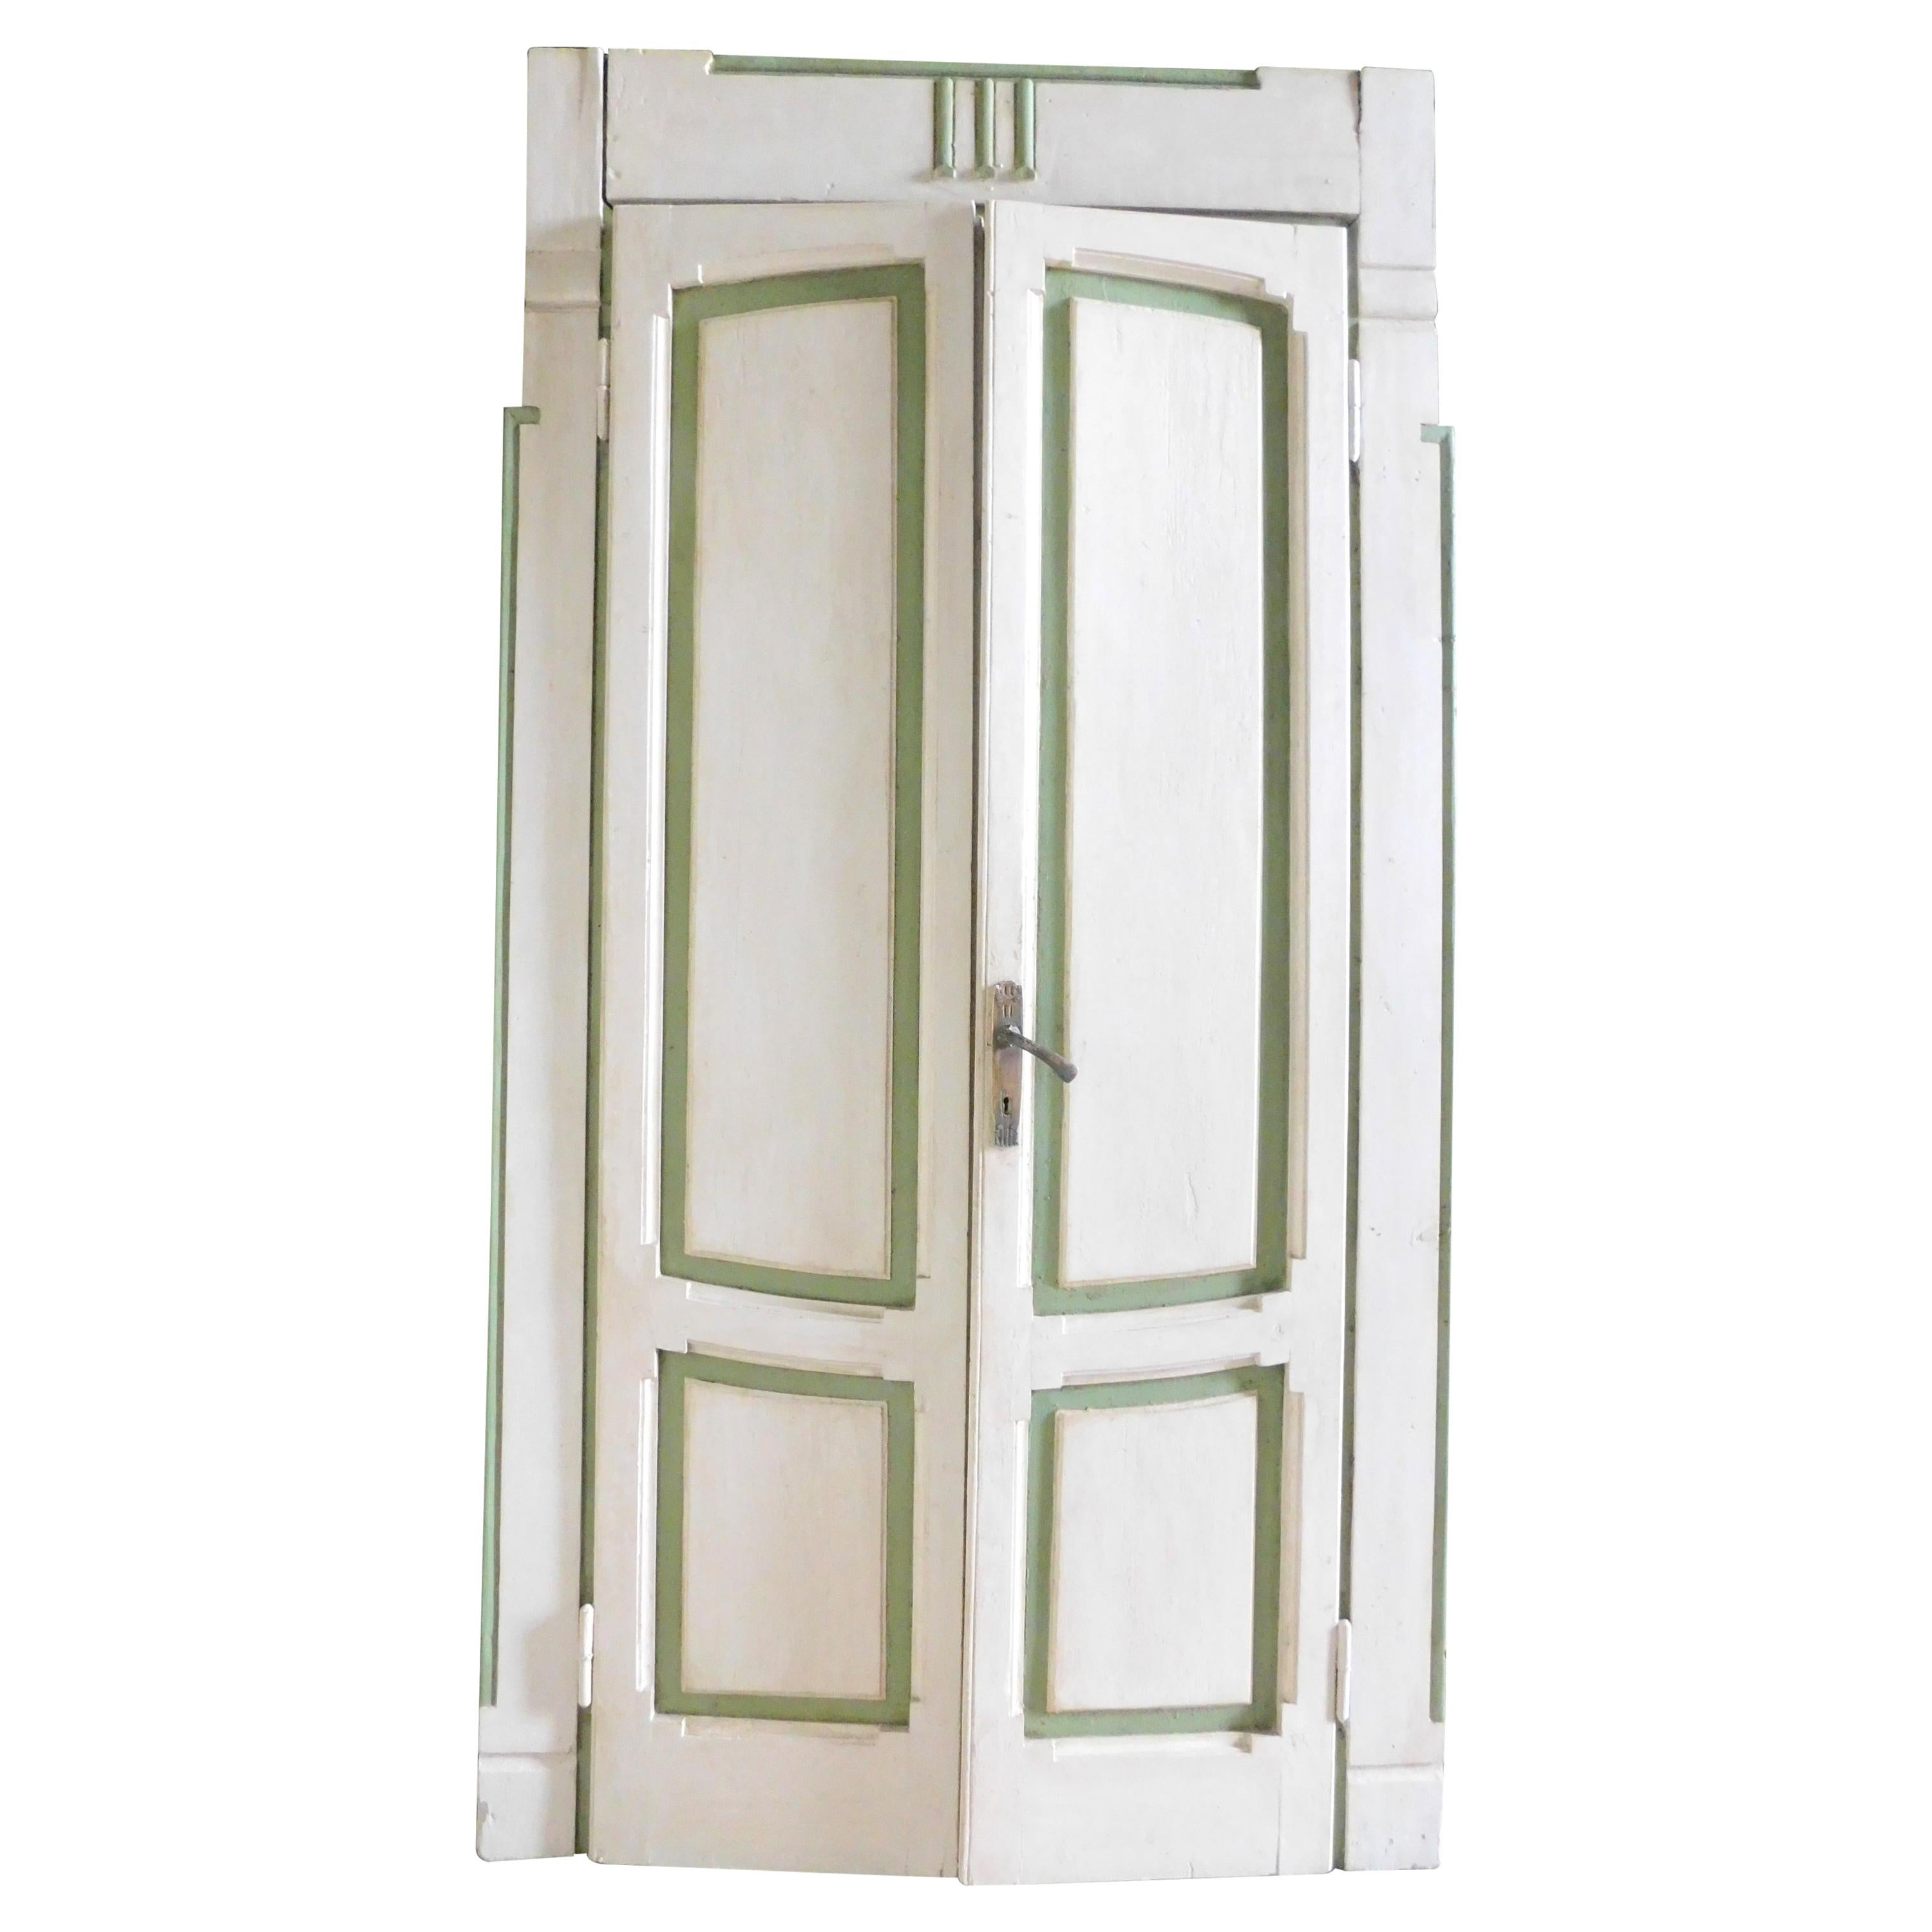 Set of 4 Deco Lacquered Doors, White / Green, Different Size, Milan 1920 For Sale